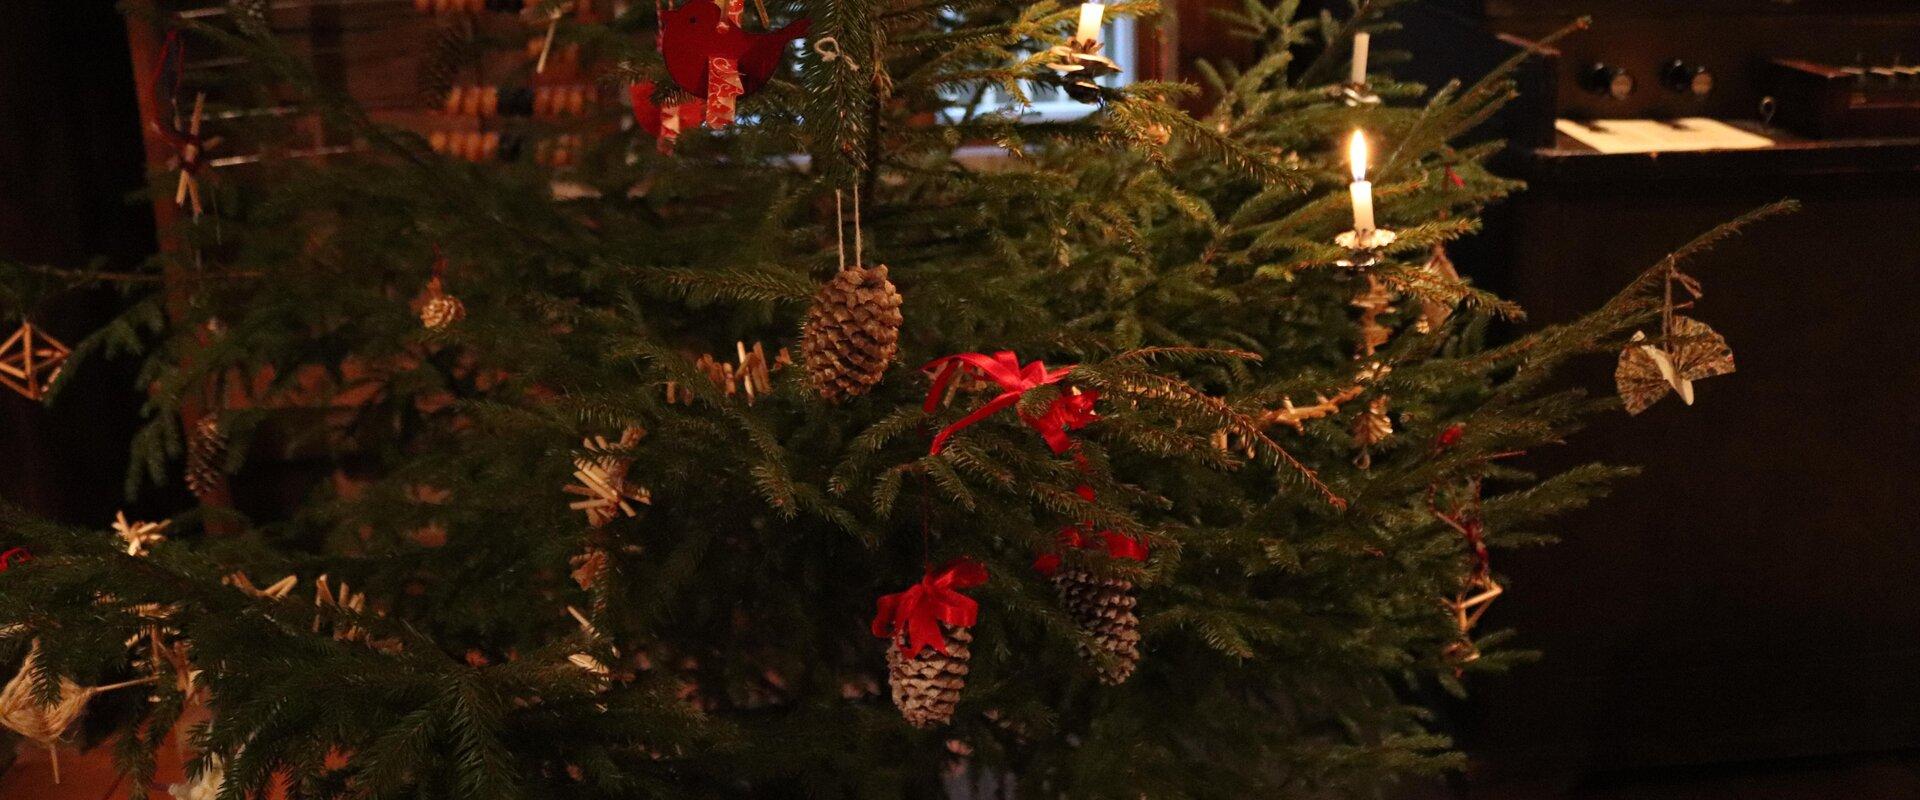 The Estonian Open Air Museum invites you to experience a bright Christmas season in different eras. Around the inn there will be a Christmas fair wher